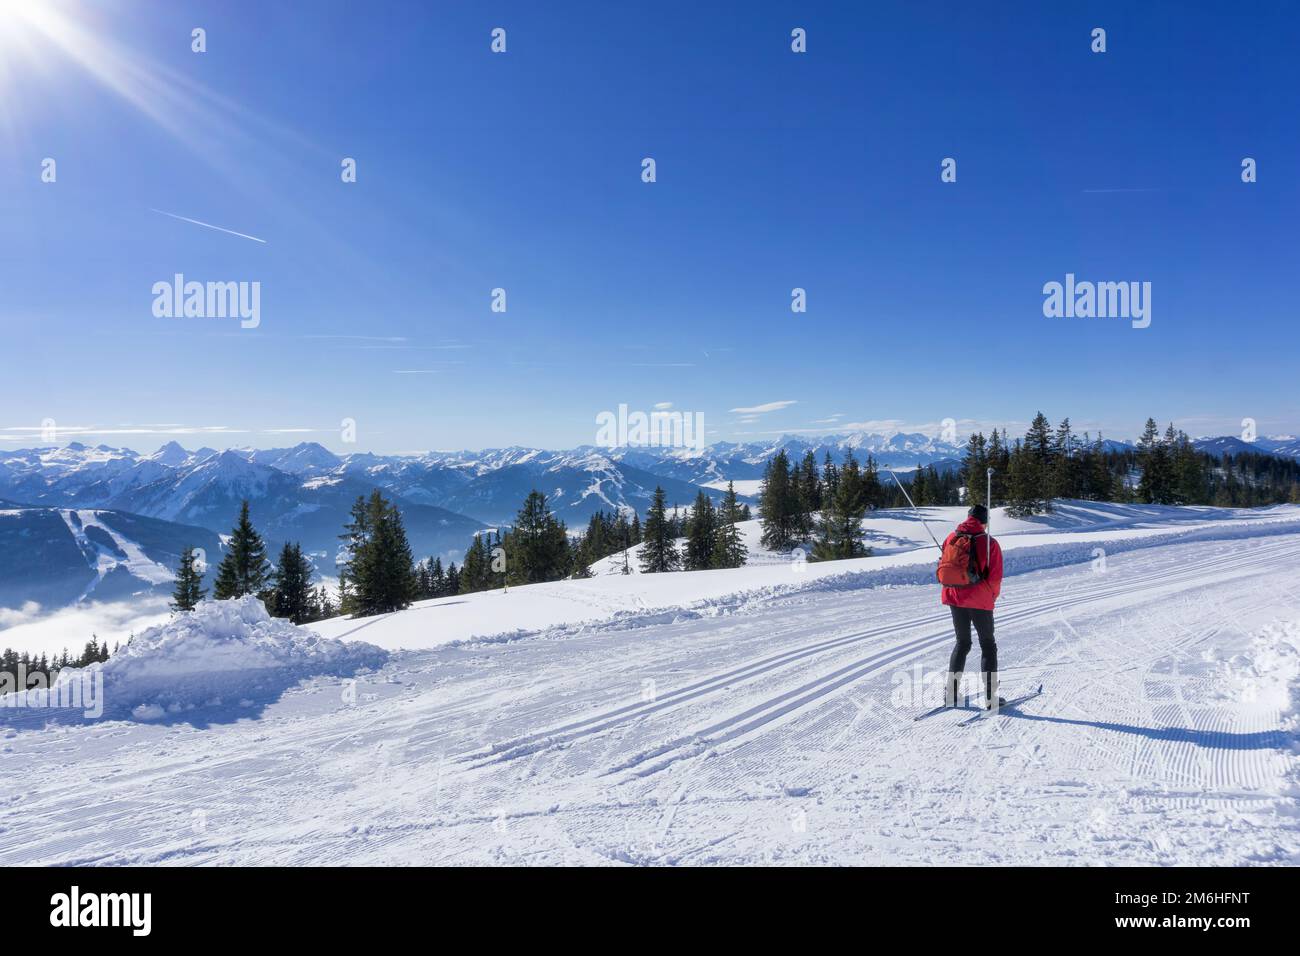 Winter mountain landscape, sunny day in Salzburg Alps. Single cross-country skier on groomed ski trails on top of the Rossbrand Mountain. Stock Photo